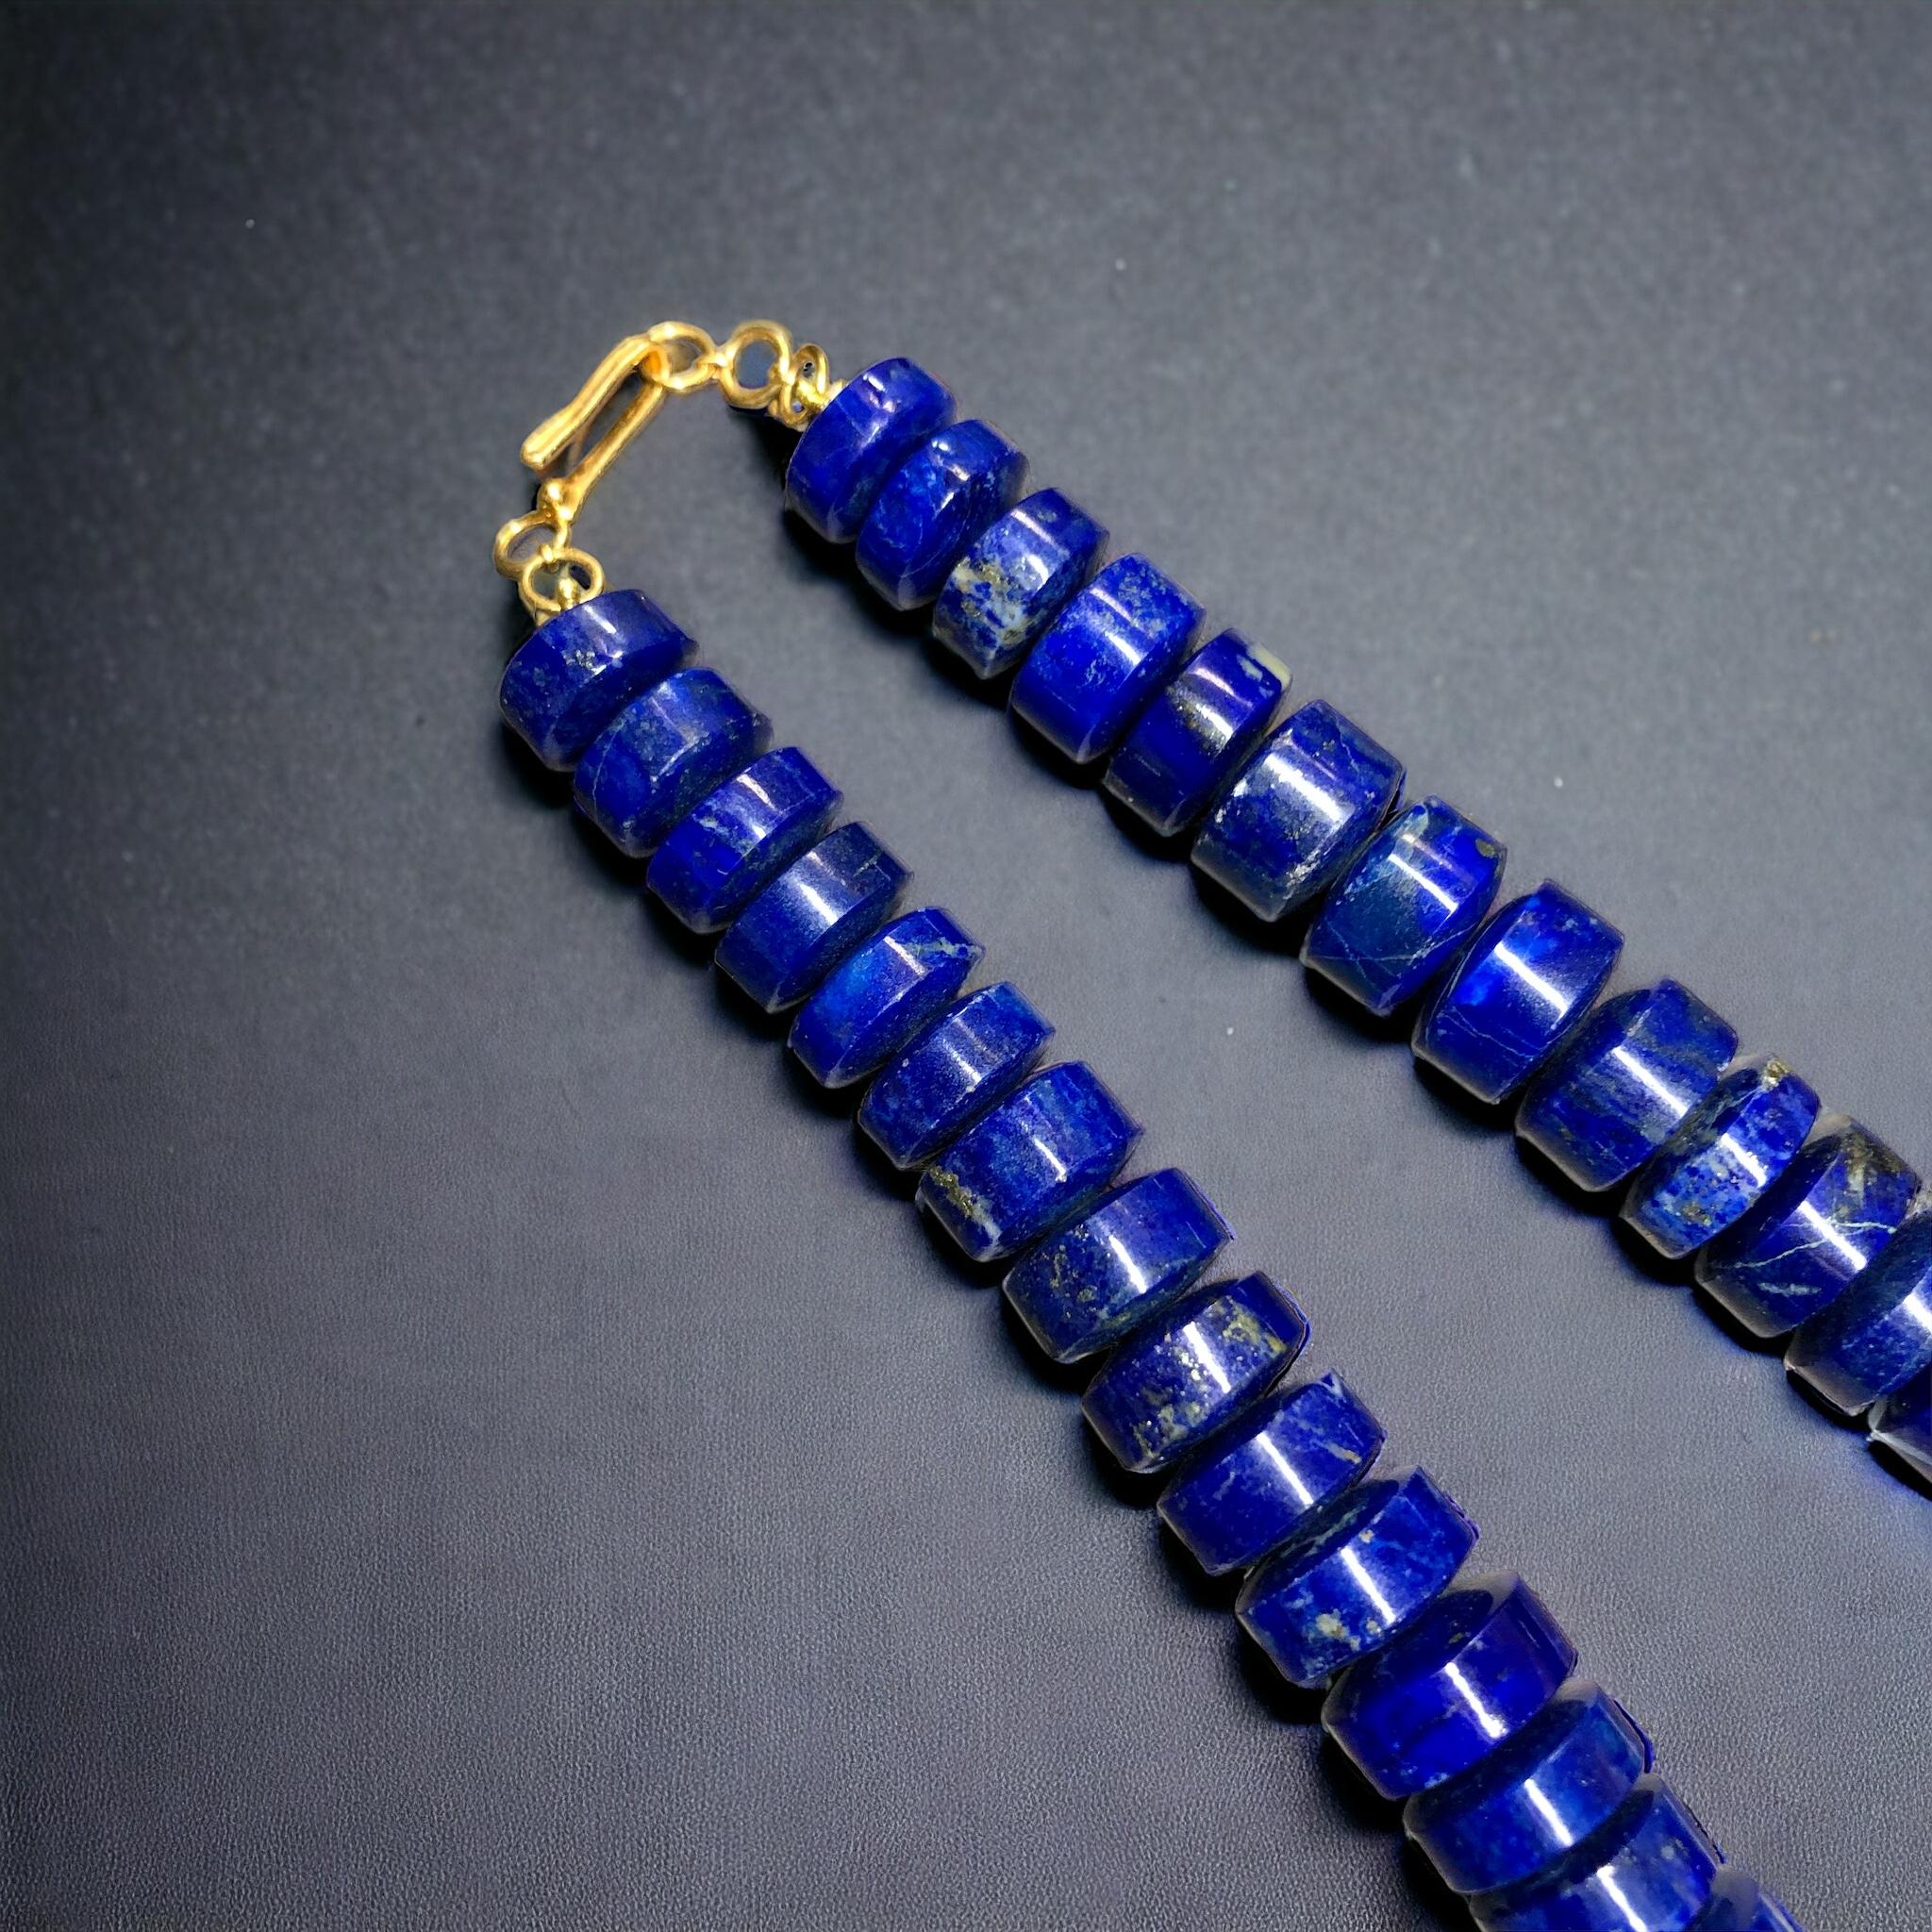 
A beautiful strand of deep blue natural cylindrical carved lapis lazuli complete with 18 karat yellow gold hook clasp.


Dimensions/Weight:

Necklace measures 15.75” and weighs 103g. Cylinders range 10.88mm to 14.40mm in diameter.


Condition:

One